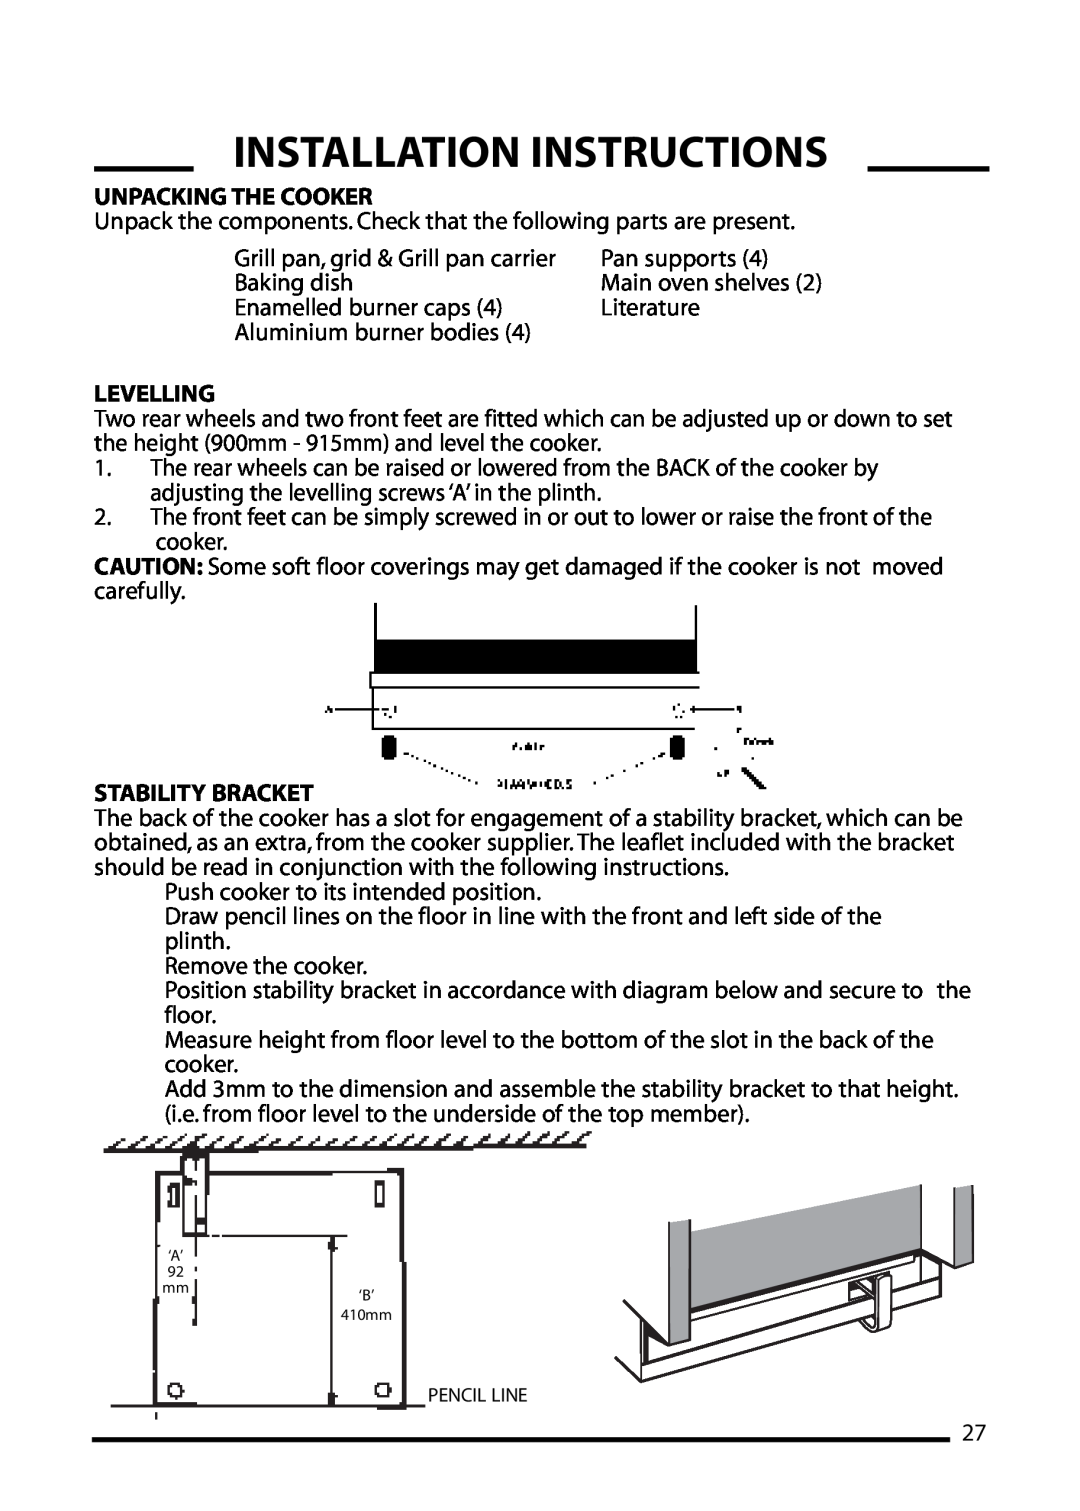 Cannon 4466200024-01 Unpacking The Cooker, Levelling, Stability Bracket, Installation Instructions 